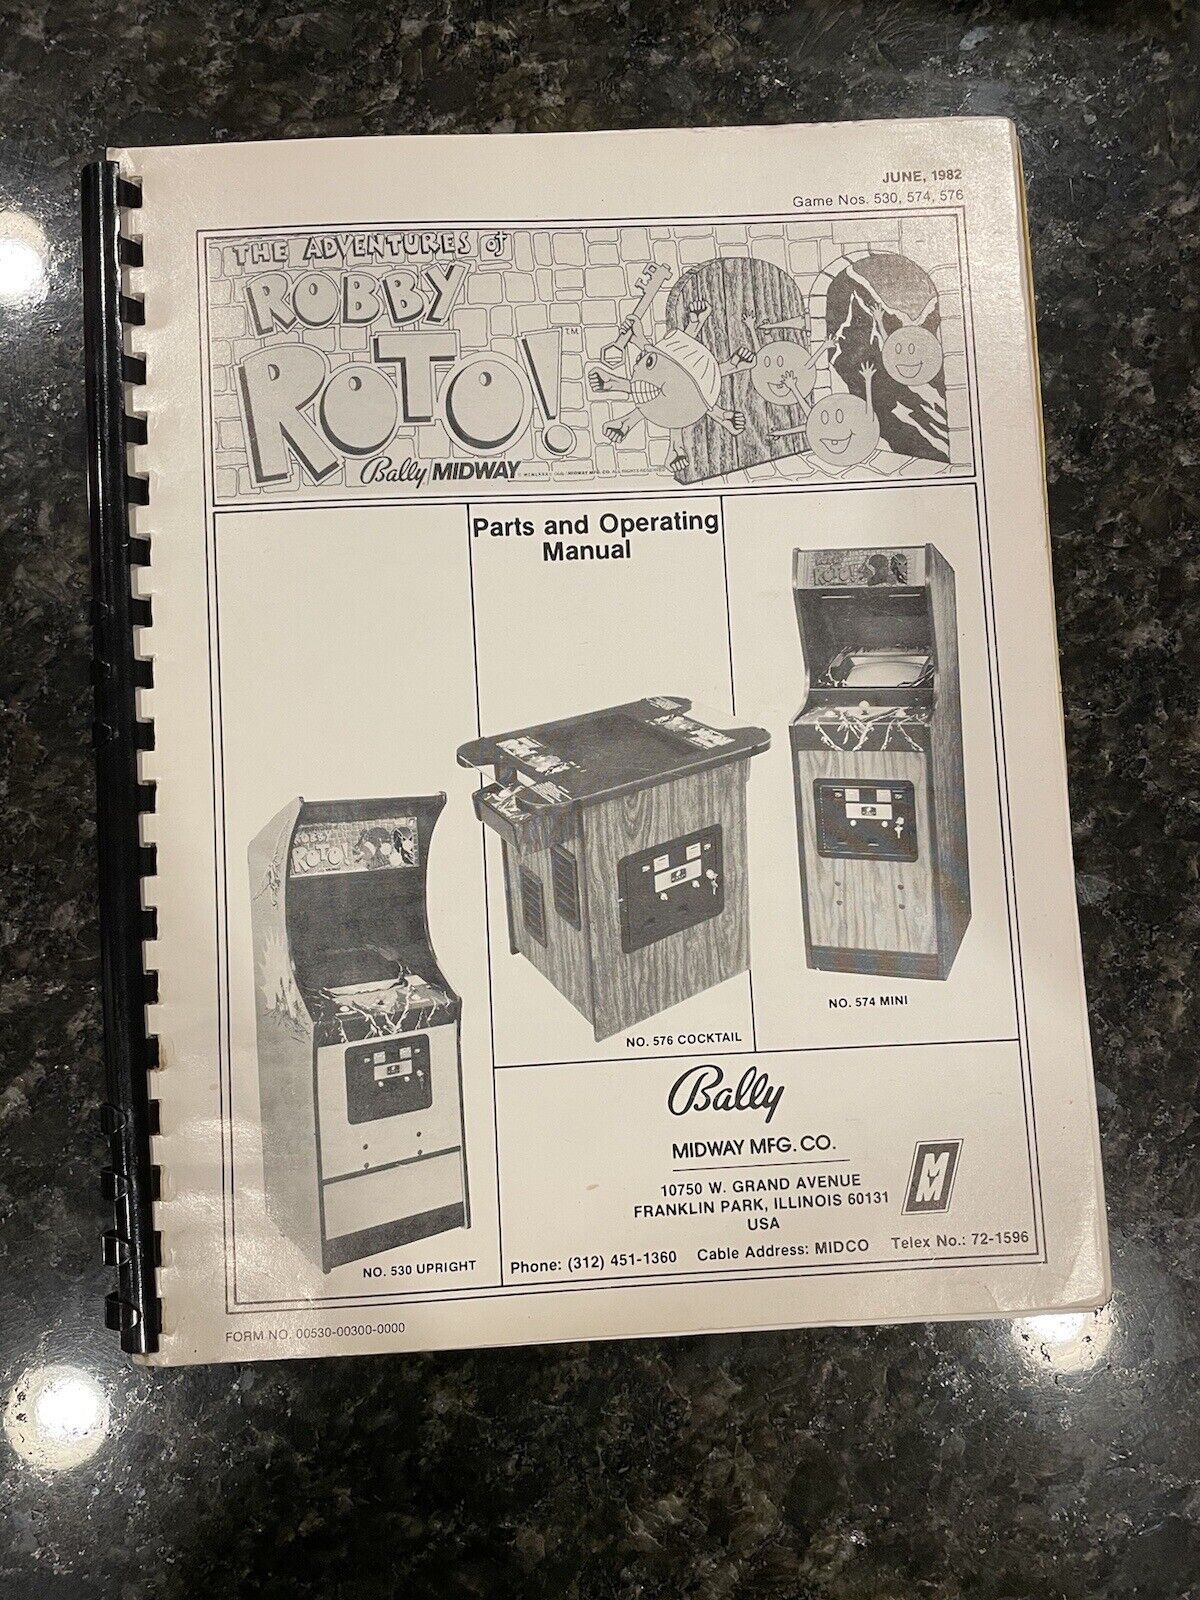 Bally Midway The Adventures Of Robby Roto Original Parts And Operating Manual